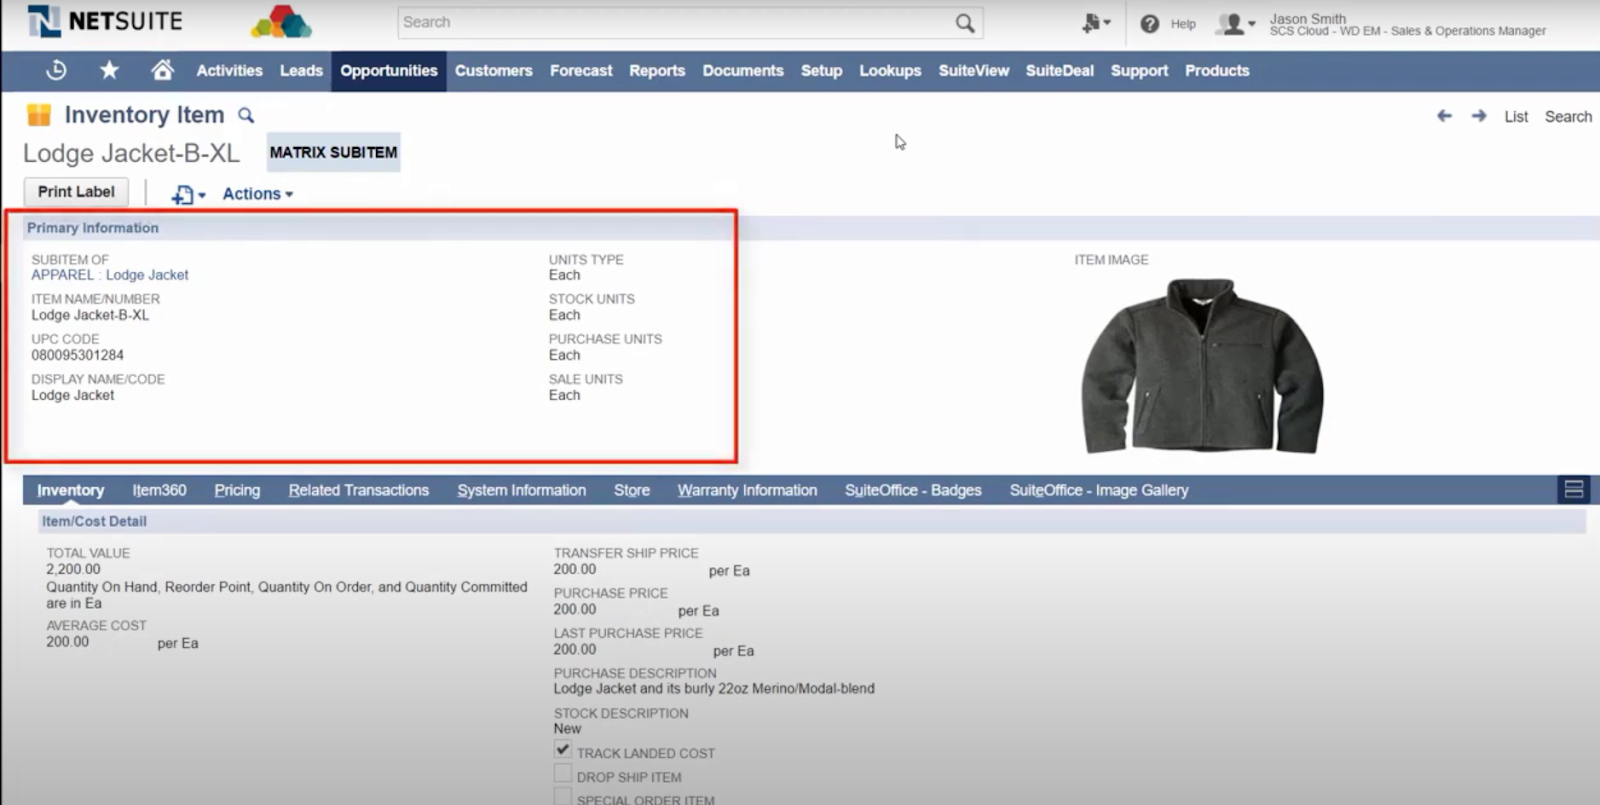 Primary information tab of the items record, showing the product name, UPC code, stock, purchase units, etc. 